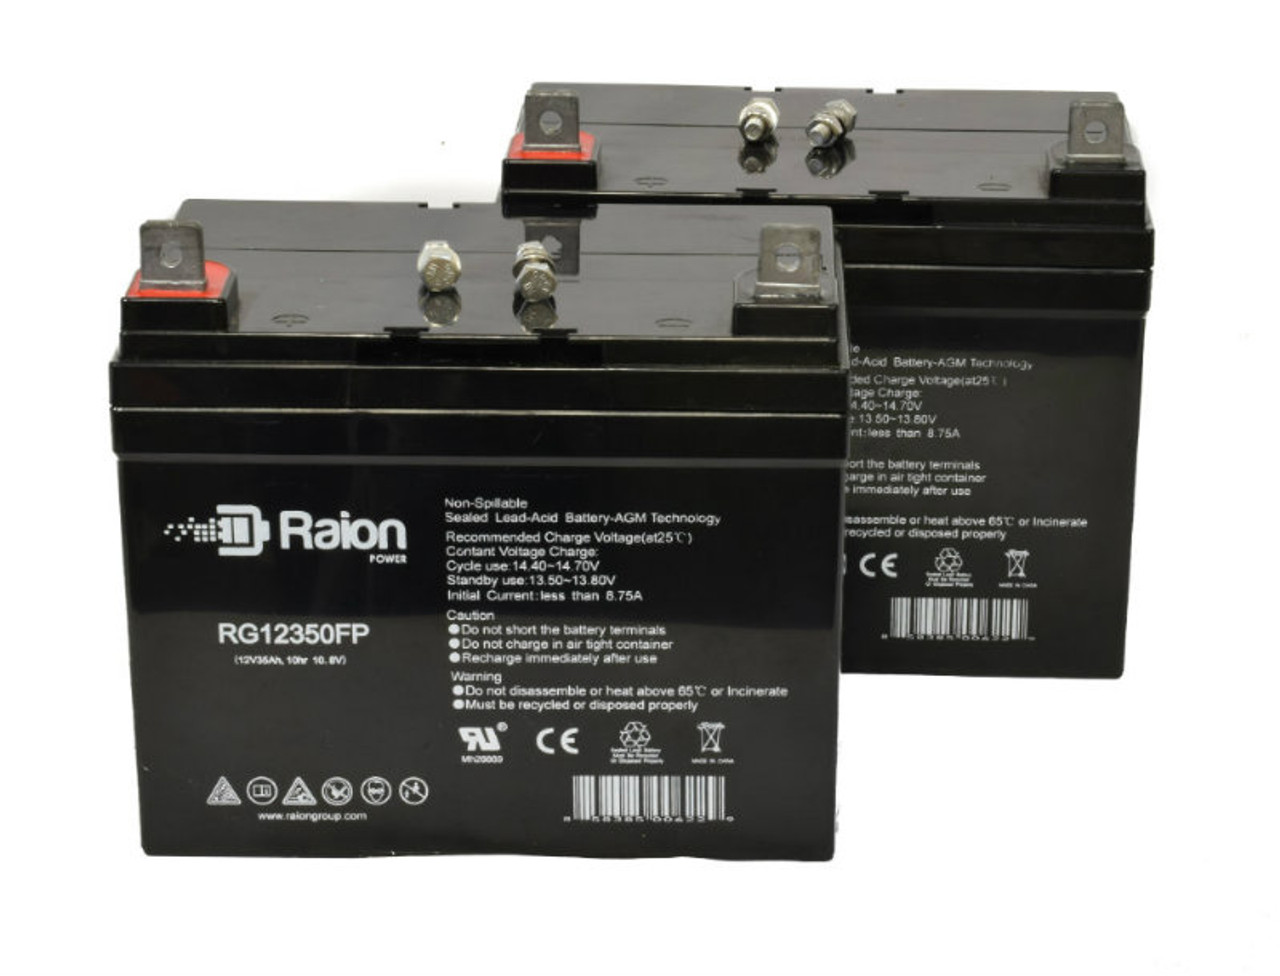 Raion Power Replacement 12V 35Ah Lawn Mower Battery for Honda H4518 - 2 Pack